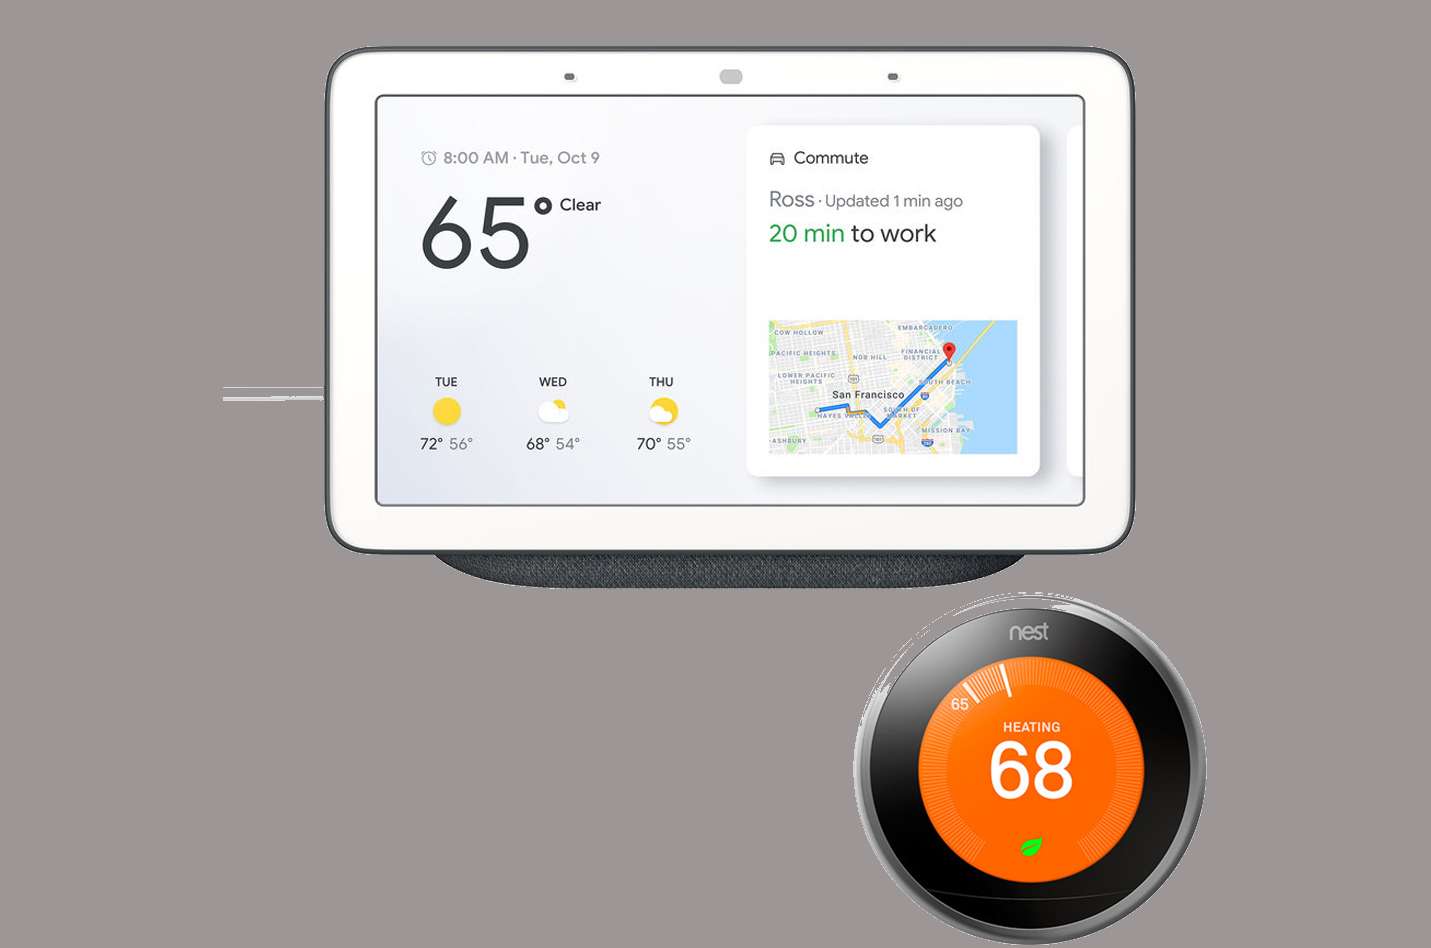 https://www.digitaltrends.com/wp-content/uploads/2019/10/google-home-hub-with-google-assistant-with-nest-learning-thermostat-01.jpg?fit=720%2C720&p=1